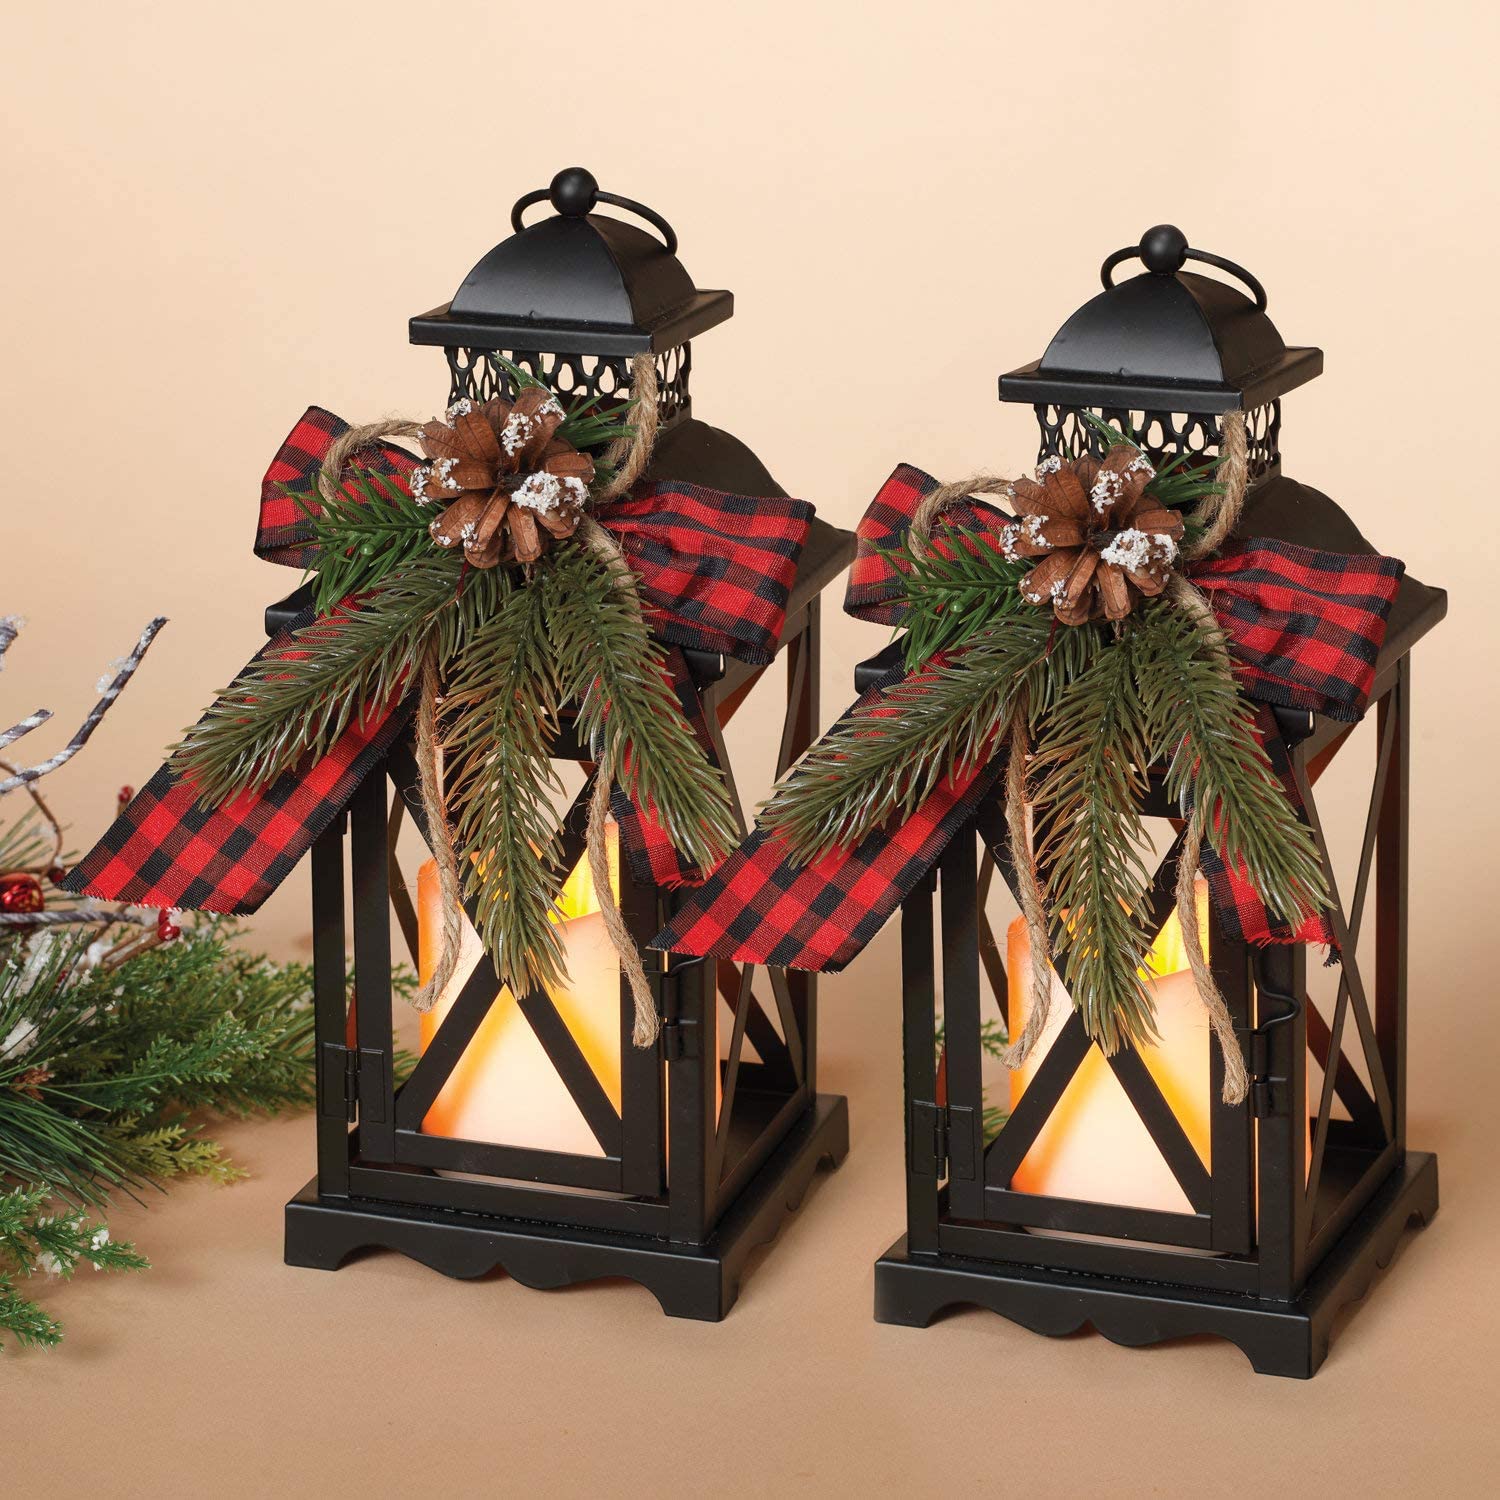 Set of 2 10.5-Inch Rustic Metal Lighted Holiday Lantern Candle Holders with  Greenery and Ribbon Accents and Timer – Hanging or Tabletop LED Christmas